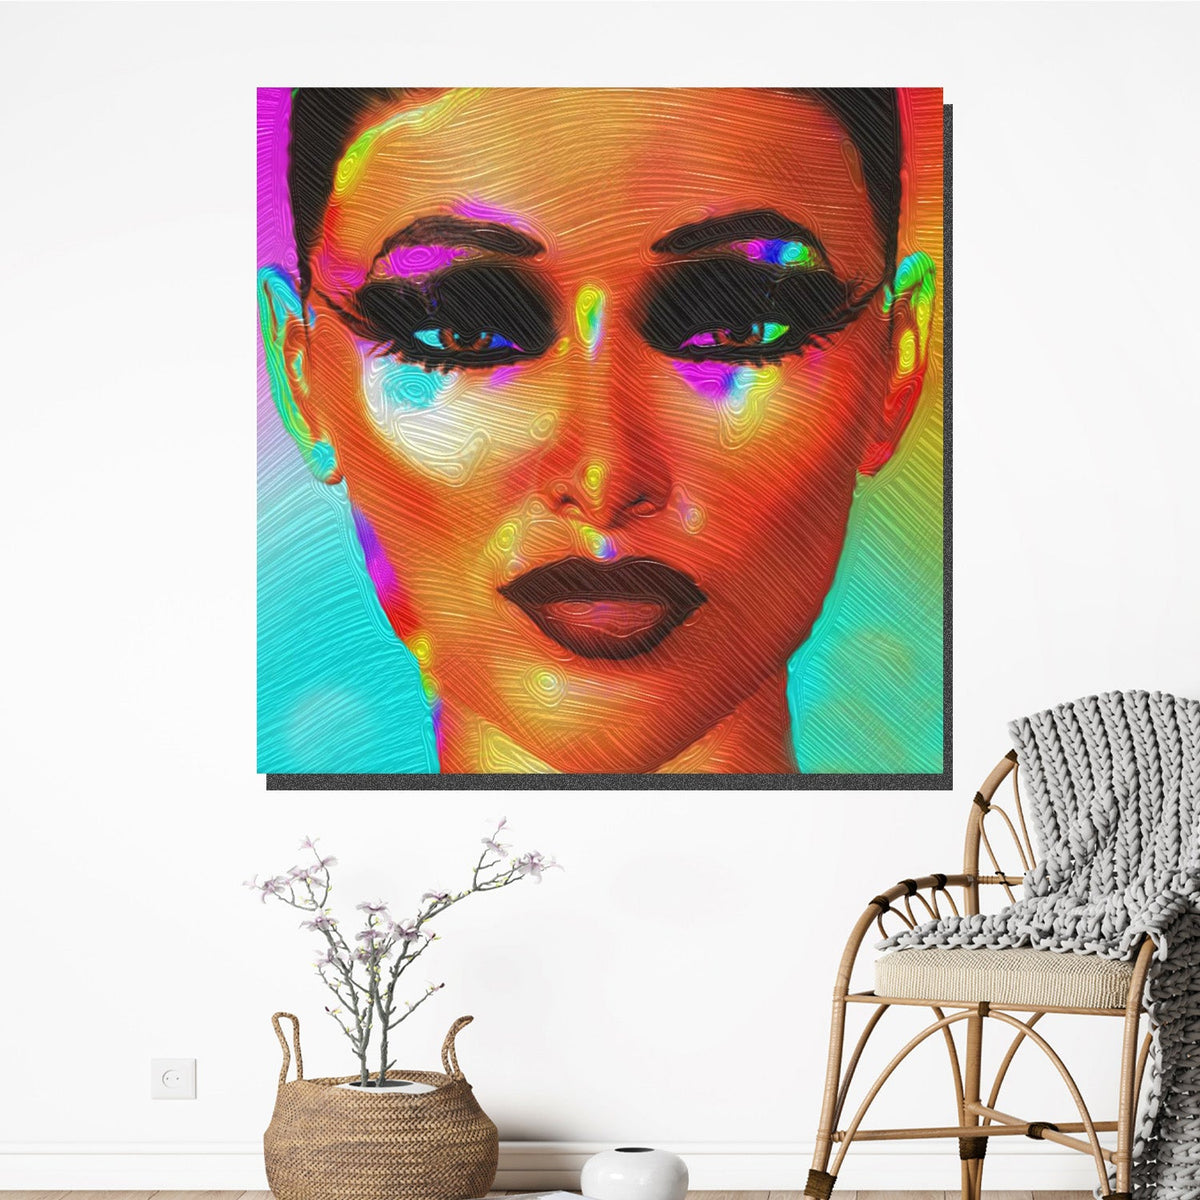 https://cdn.shopify.com/s/files/1/0387/9986/8044/products/IllusionCanvasArtprintStretched-4.jpg